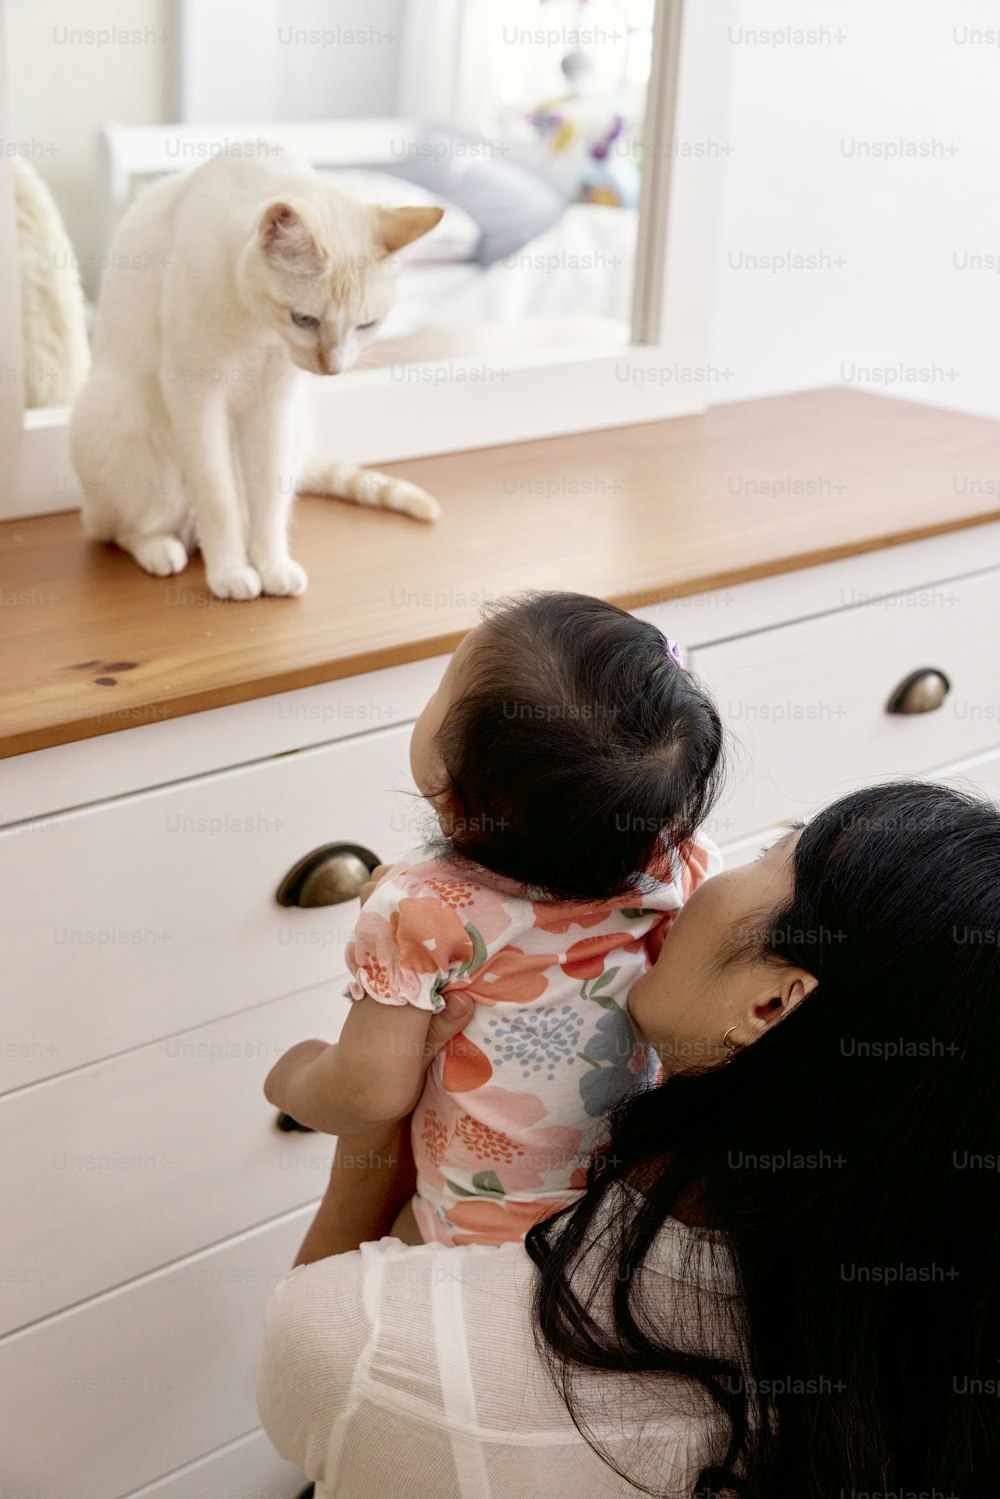 a woman holding a child looking at a cat